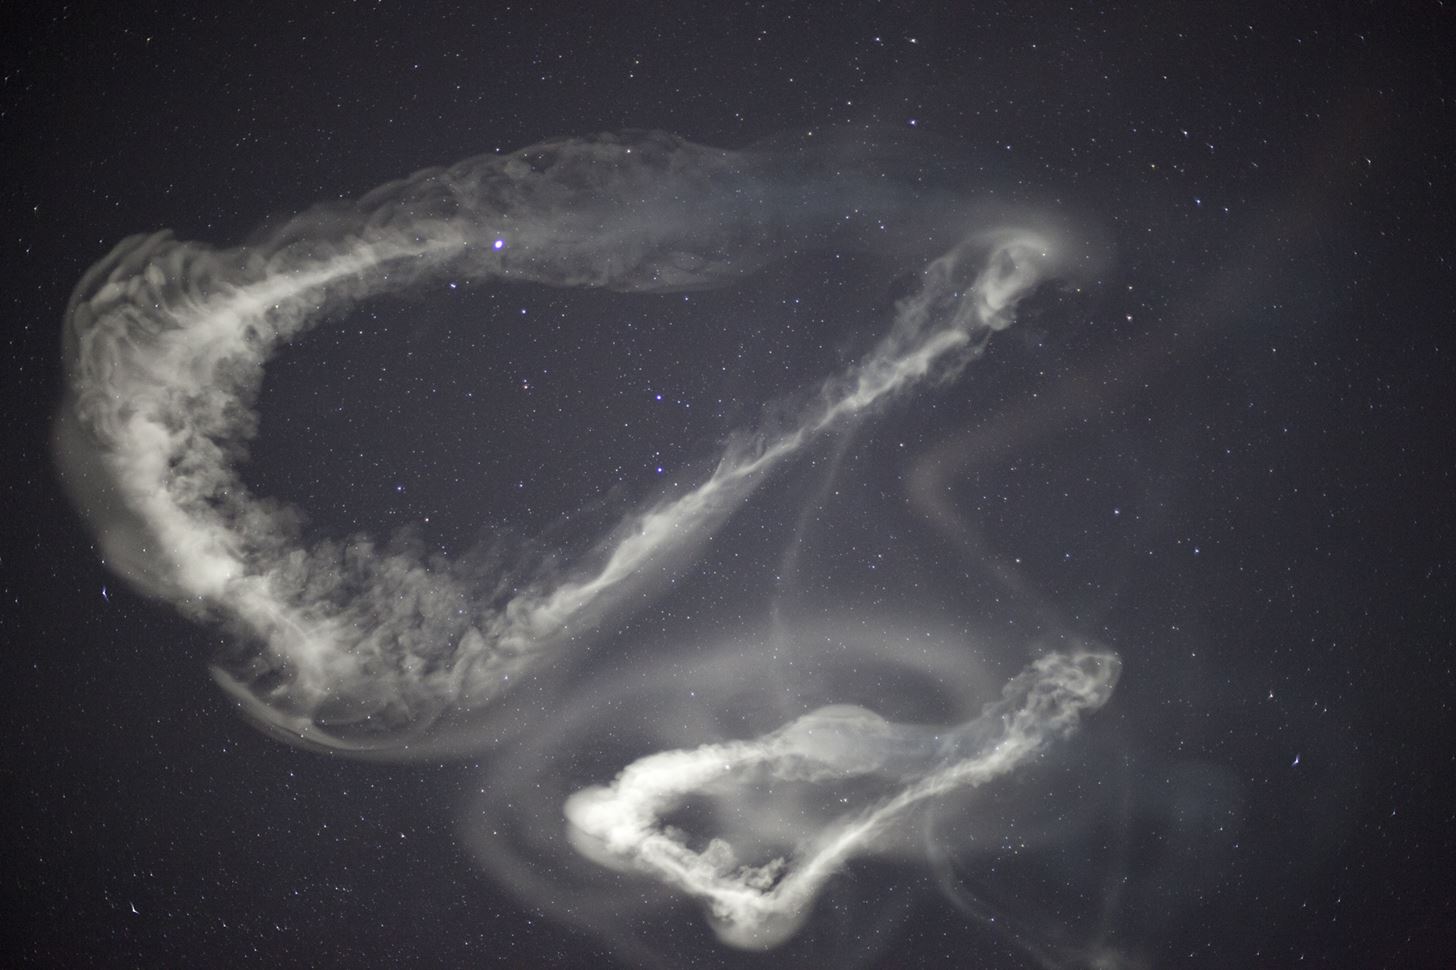 Watch NASA's Tracer Rockets Light Up the Sky with Cloud Trails